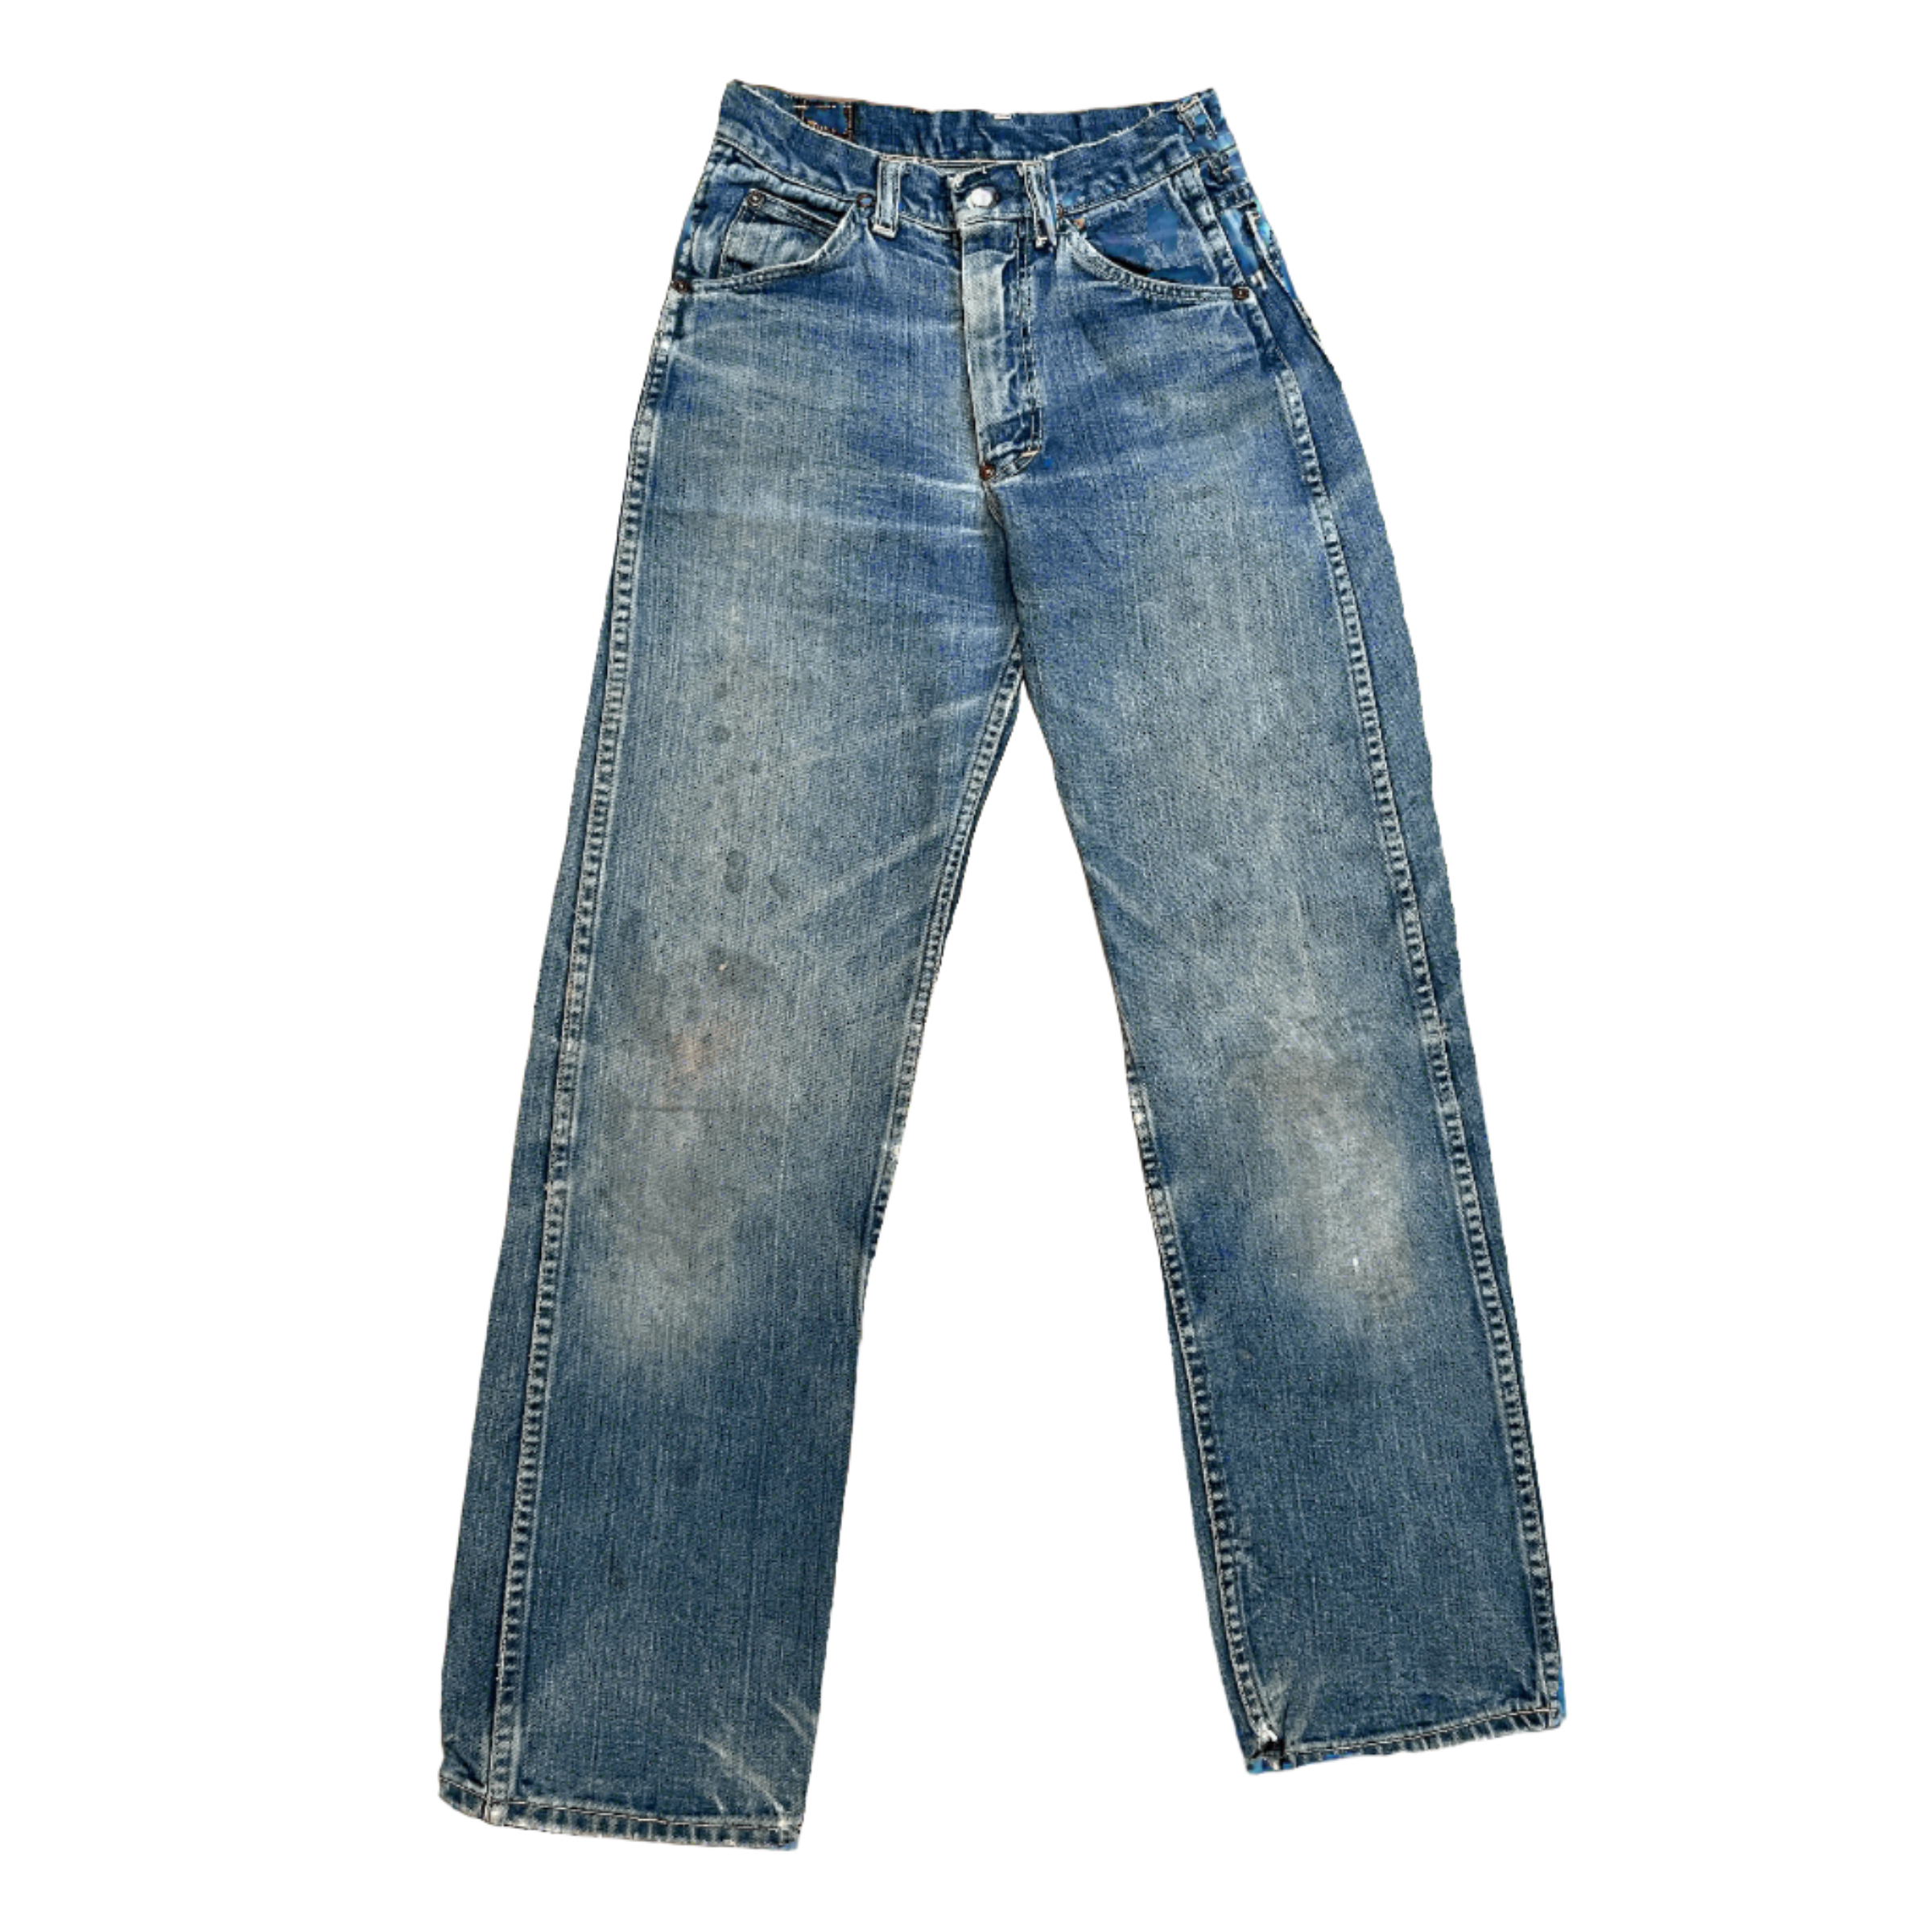 THE 501 XX A COLLECTION OF VINTAGE JEANS-